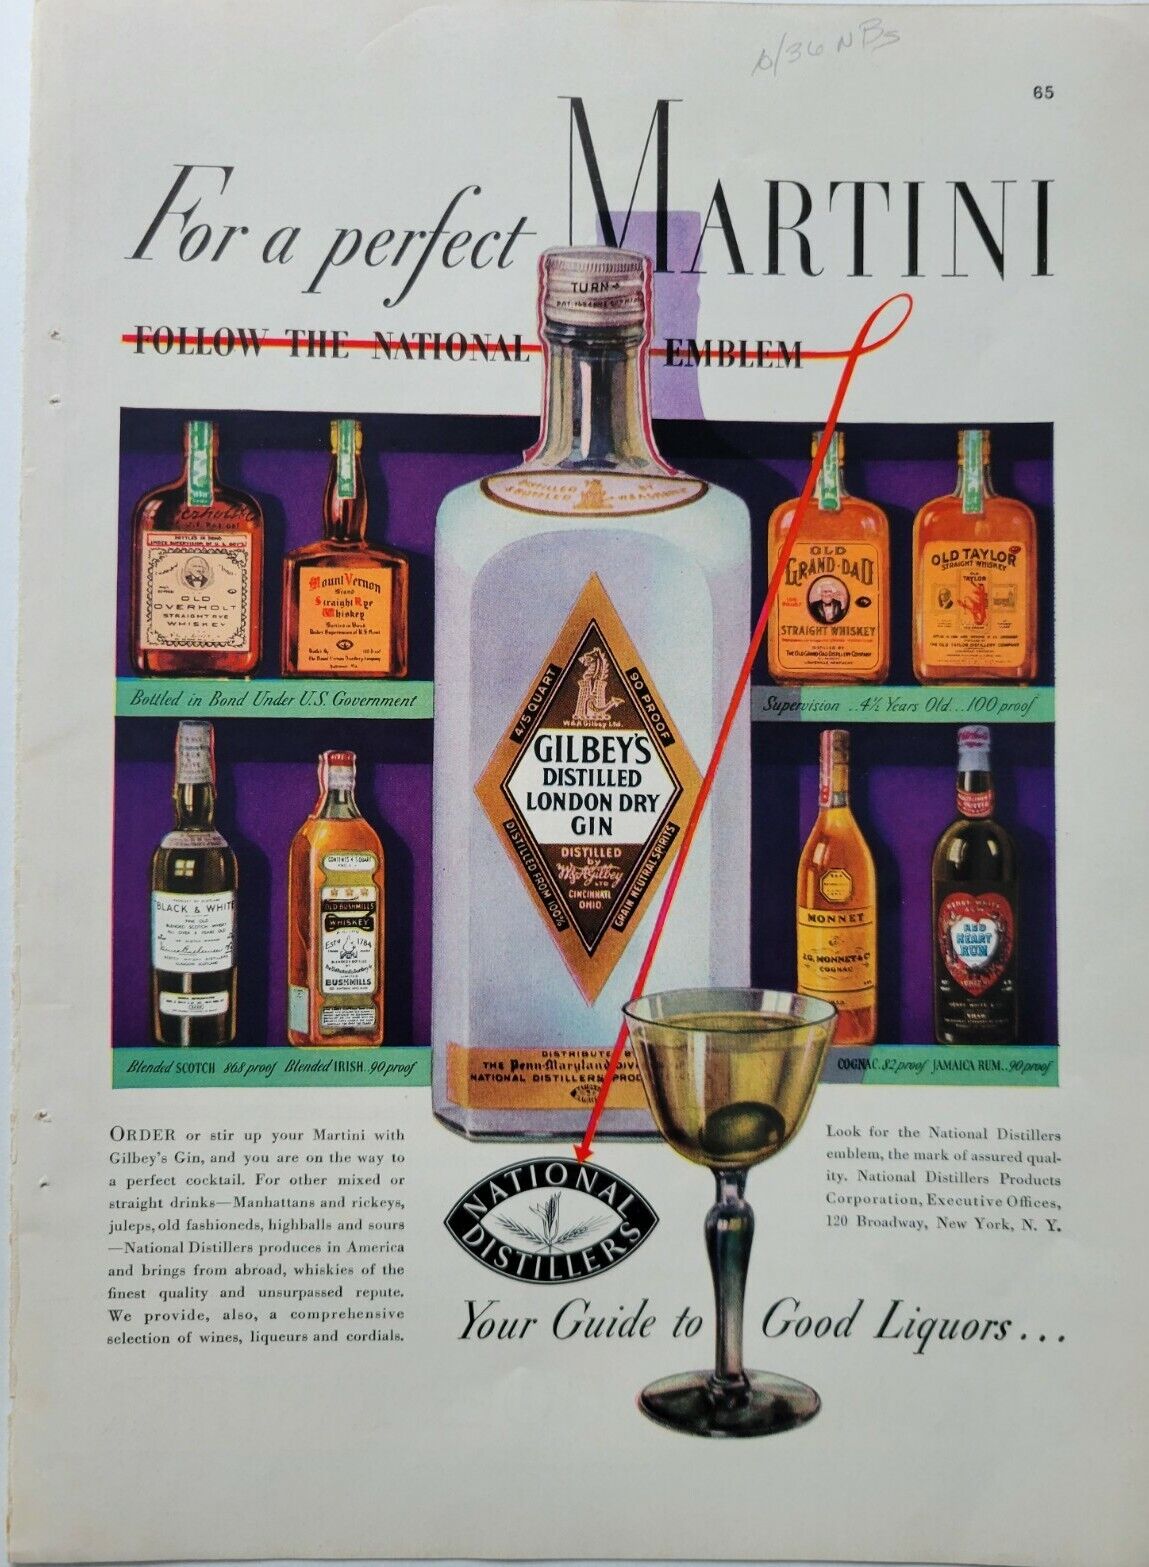 1936 Gilbeys Distilled London Dry Gin for Perfect Martini cocktail vintage ad